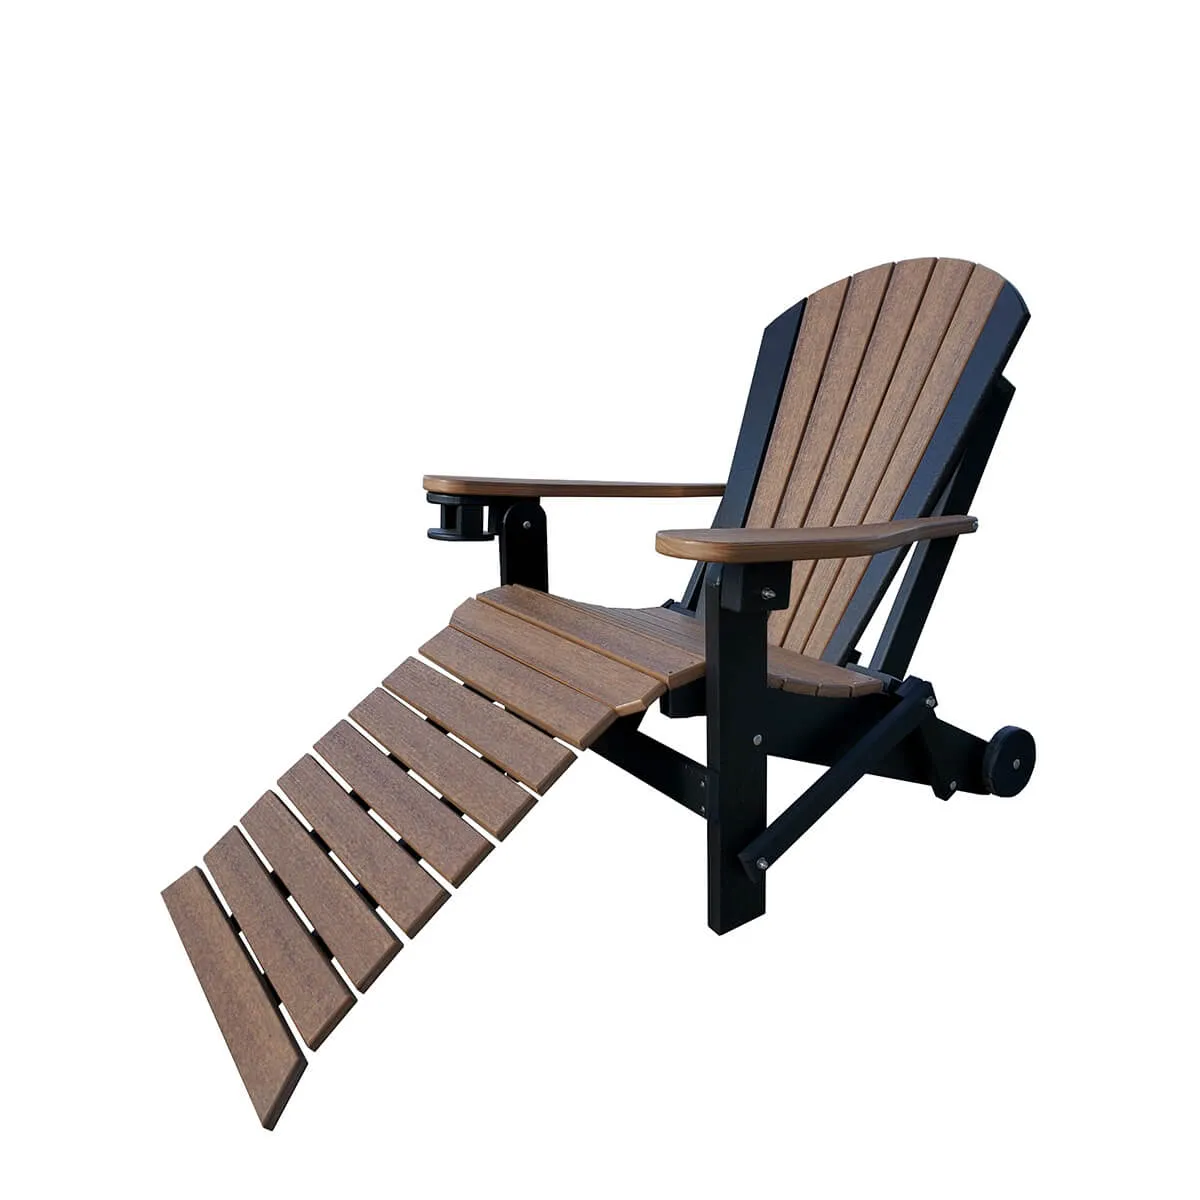 Adirondack Supreme Folding Chair with Retractable Footrest